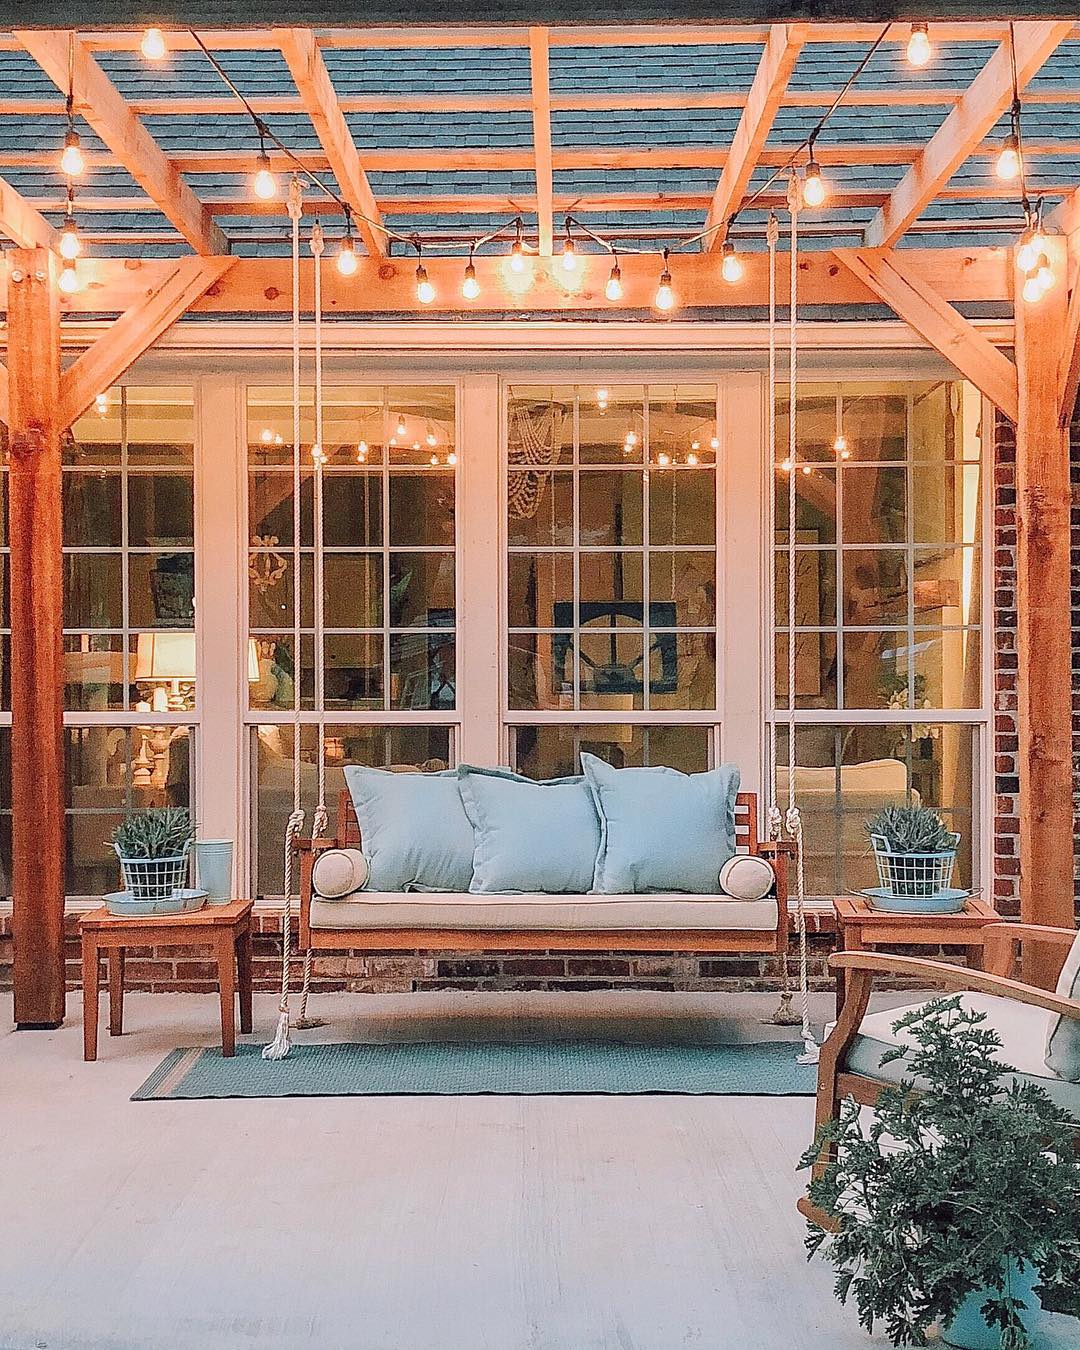 Backyard outdoor space with pergola that is lit with string lights. Photo by Instagram user @cottonstem.